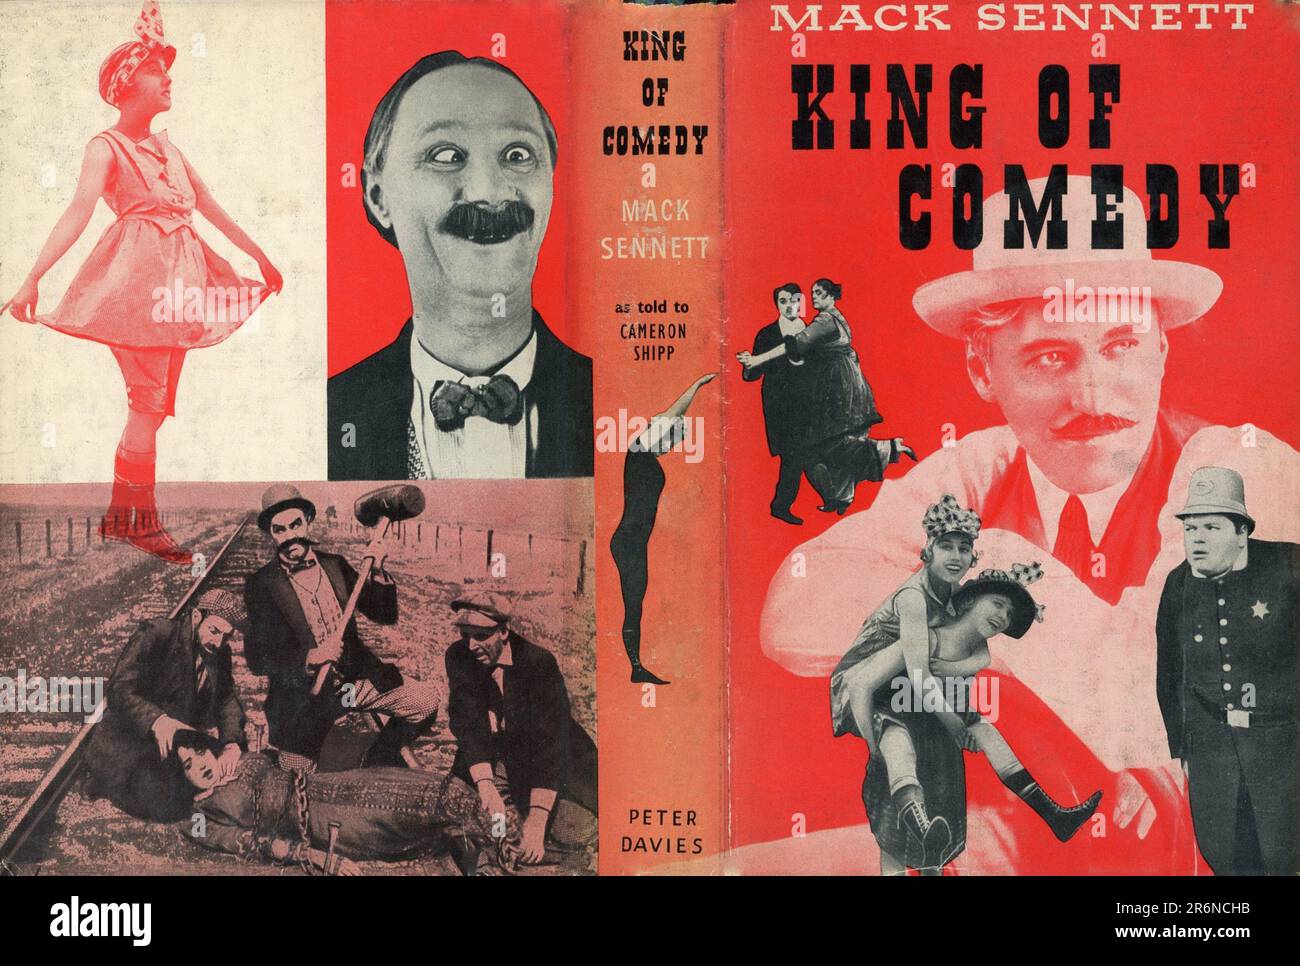 Dust Jacket / Cover for the 1st English edition of the autobiography MACK SENNETT KING OF COMEDY as told to CAMERON SHIPP published in 1955 by Peter Davies Ltd, London Stock Photo